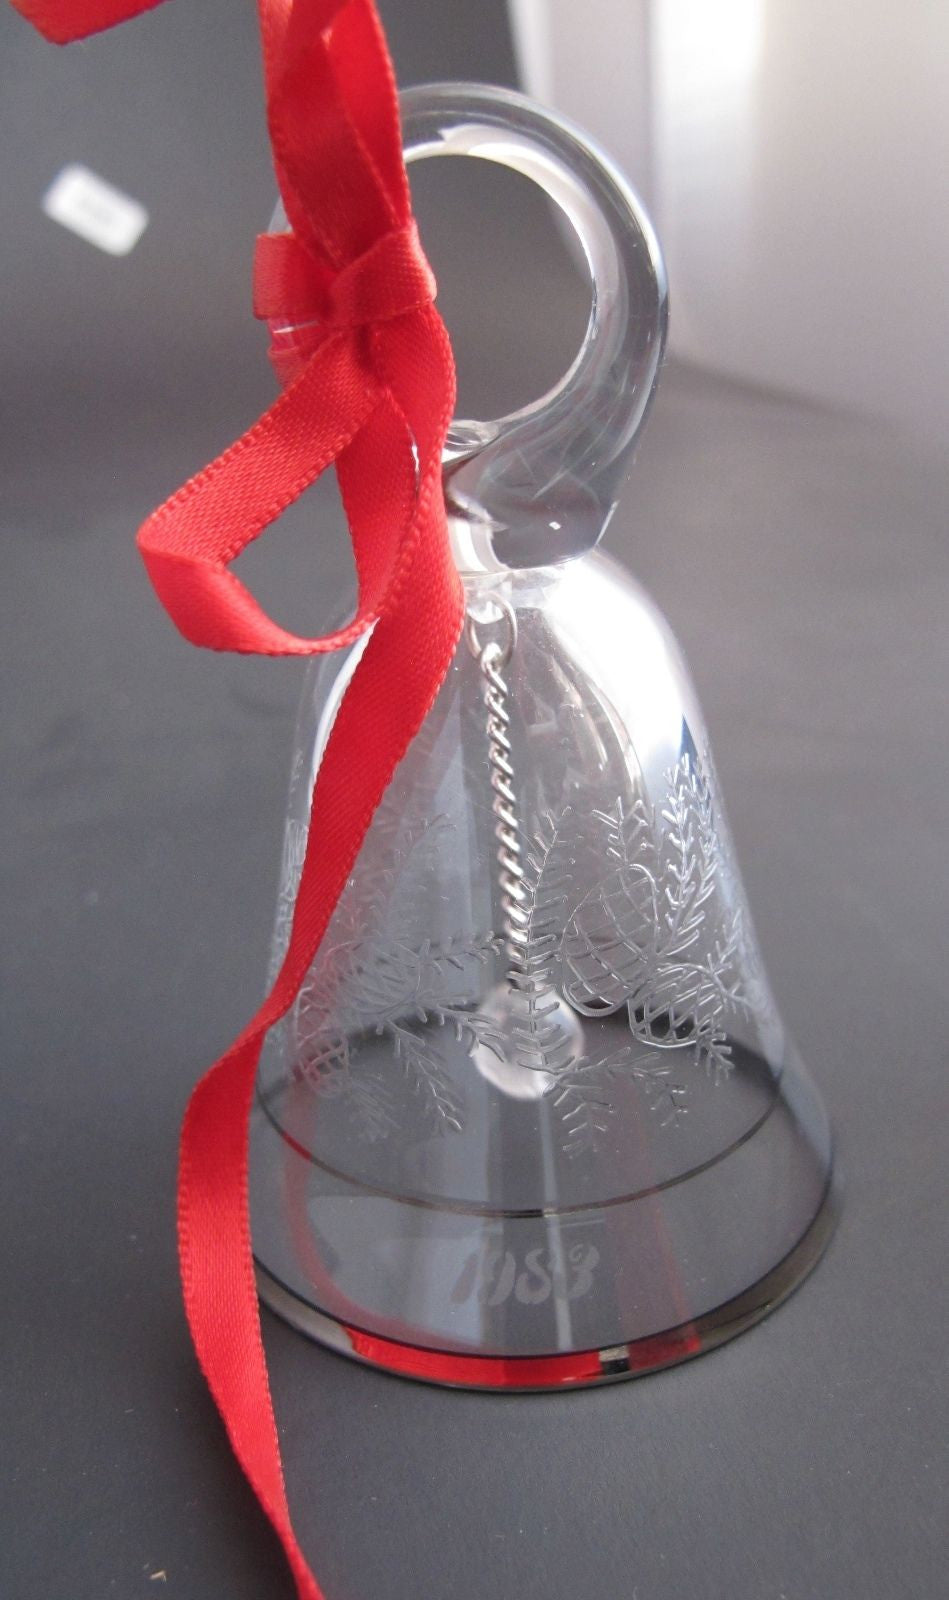 Lenox Crystal 1983 First annual Tree miniature bell ornament Made in USA - O'Rourke crystal awards & gifts abp cut glass